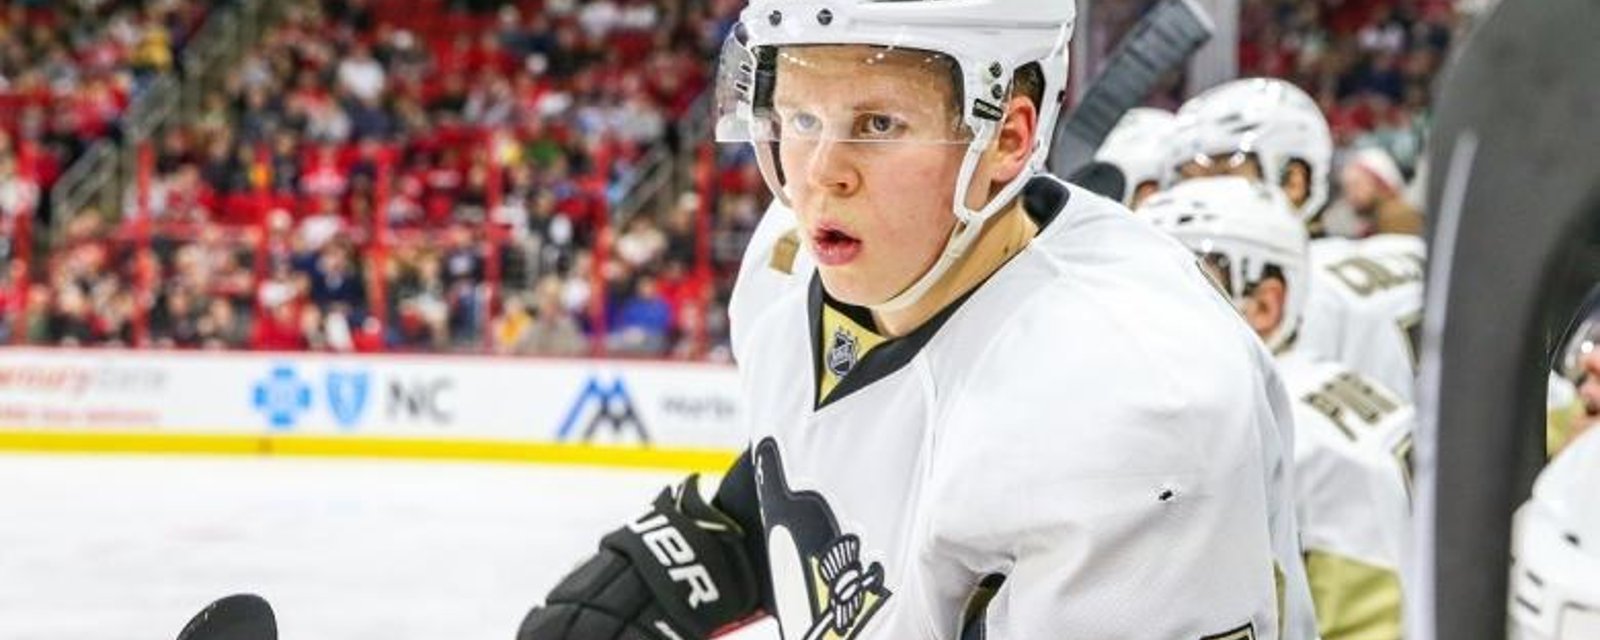 Report: Penguins sign their talented young defenseman to a long-term extension.